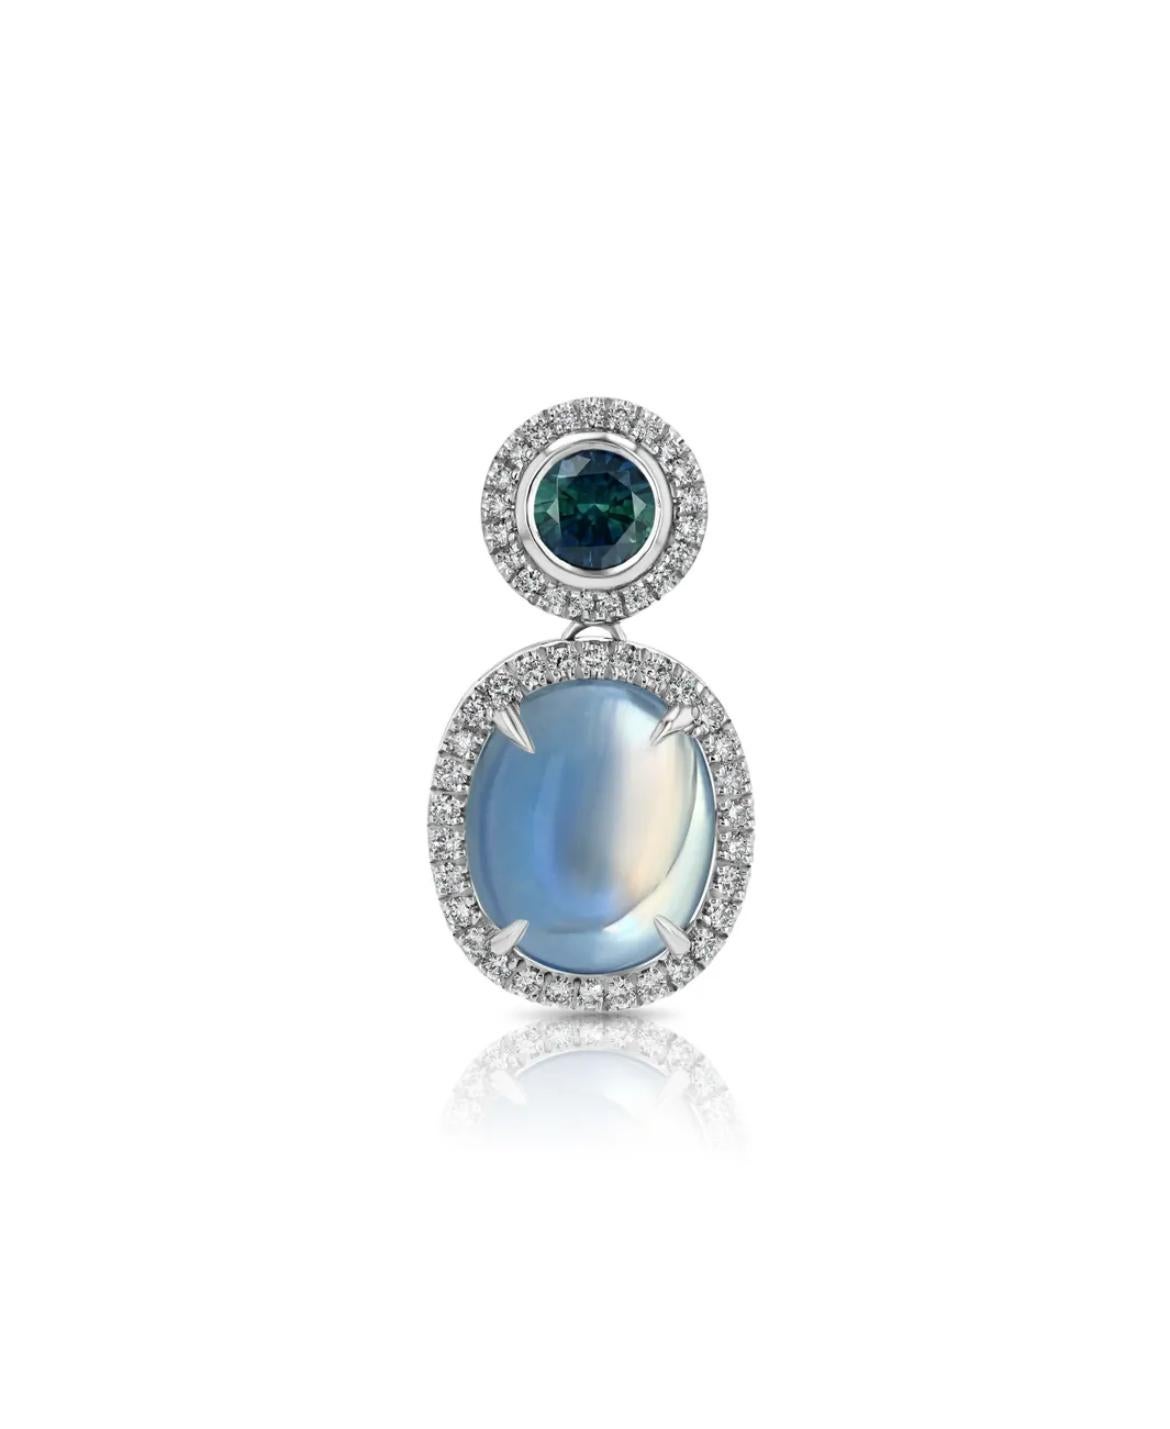 18K white gold pendant, featuring a 5.44ct rainbow moonstone, paired with a 0.63ct Montana sapphire, accented by 0.33ct round brilliant-cut diamonds.